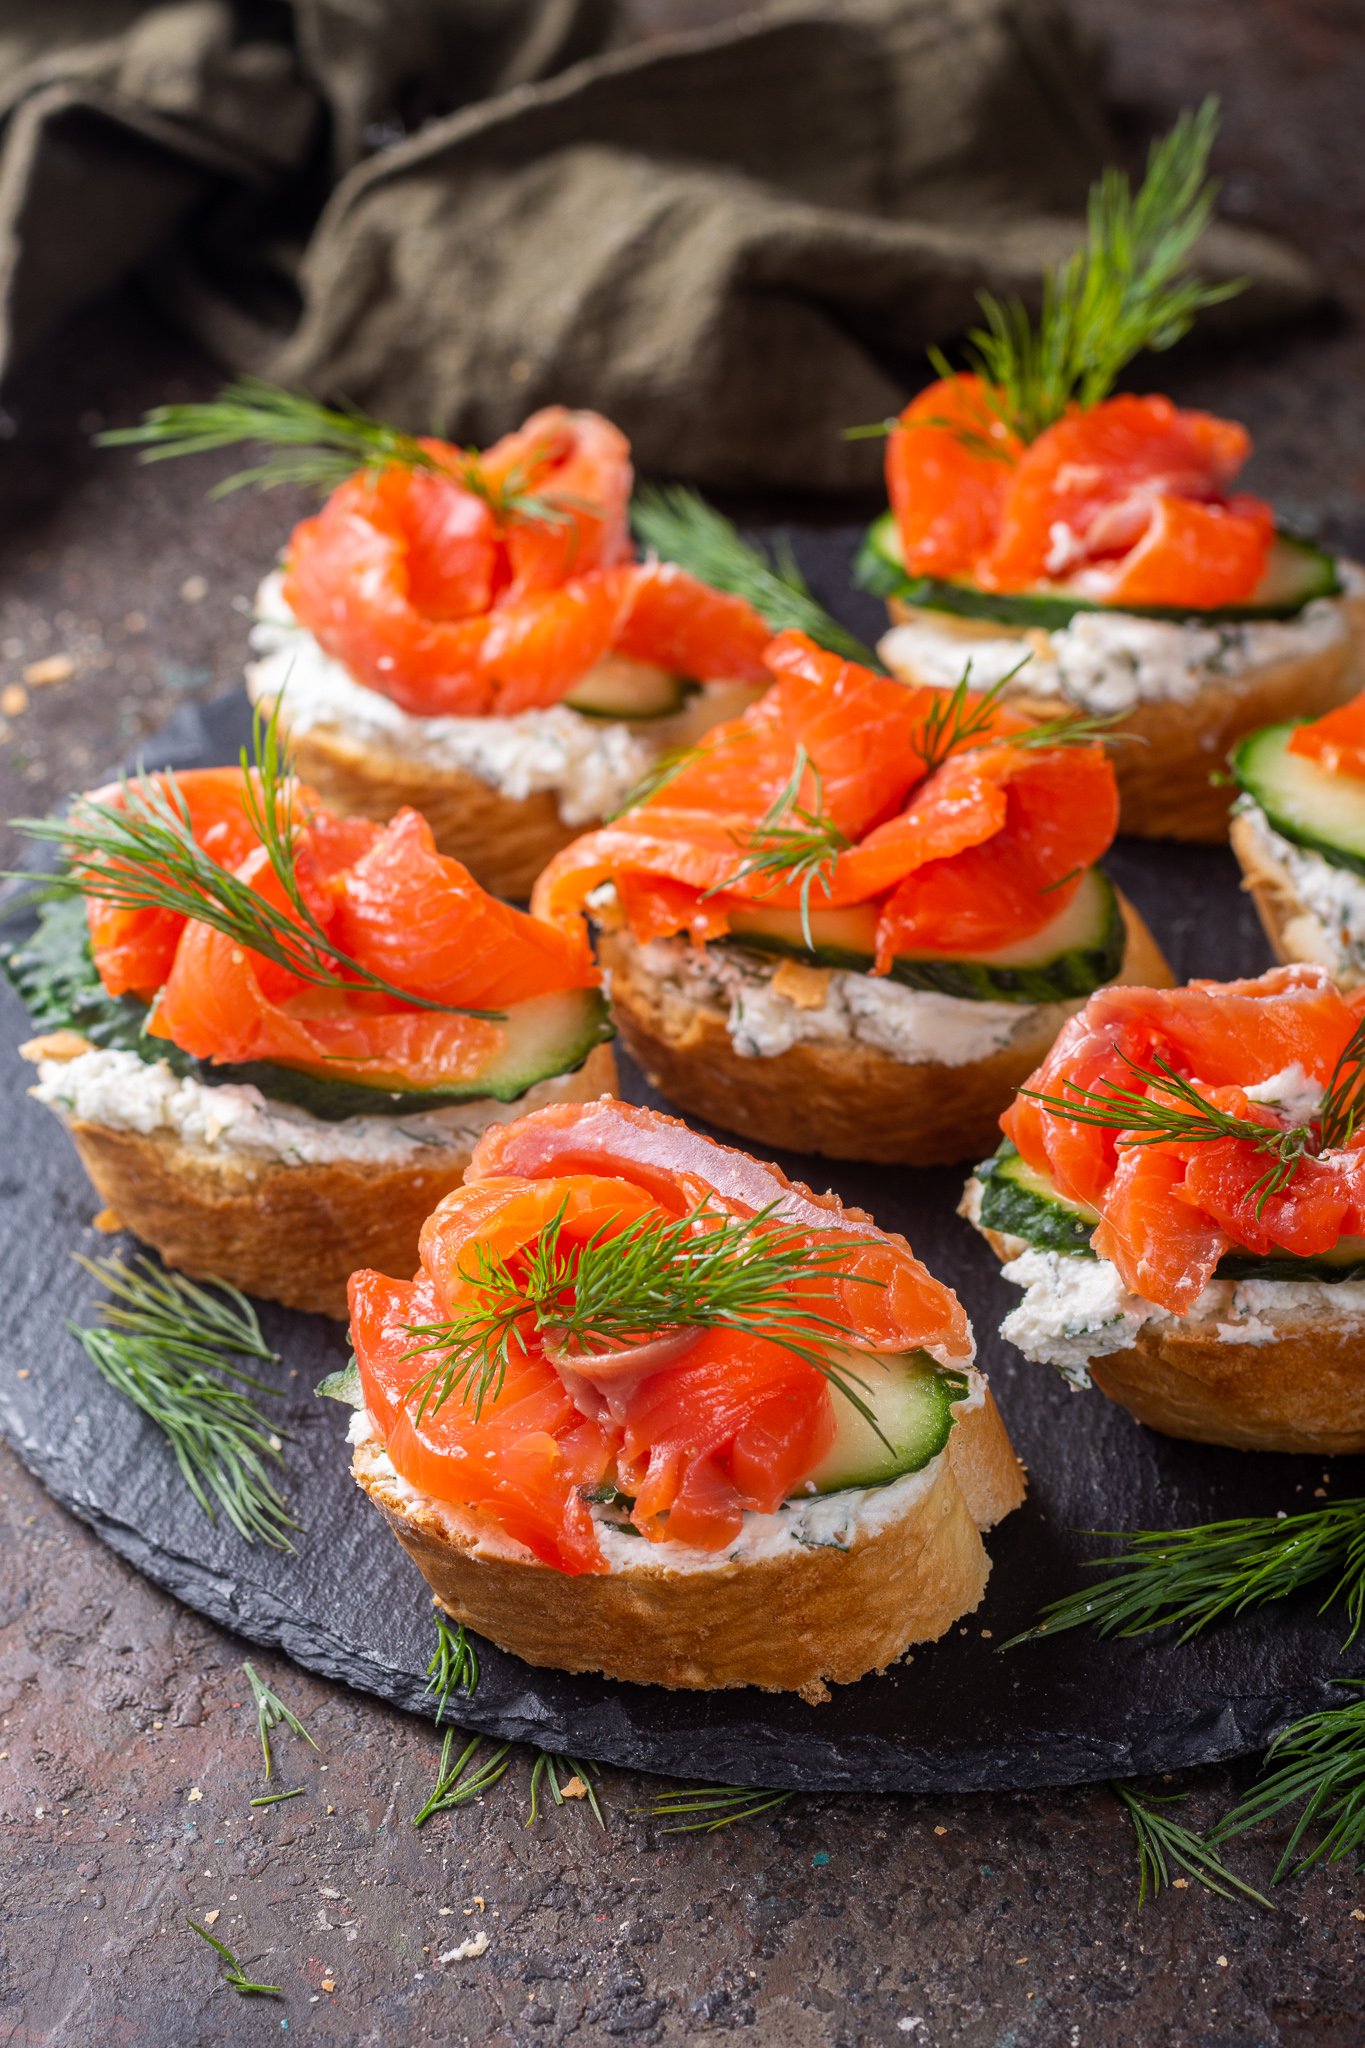 Smoked Salmon Paninis - Cooks Well With Others